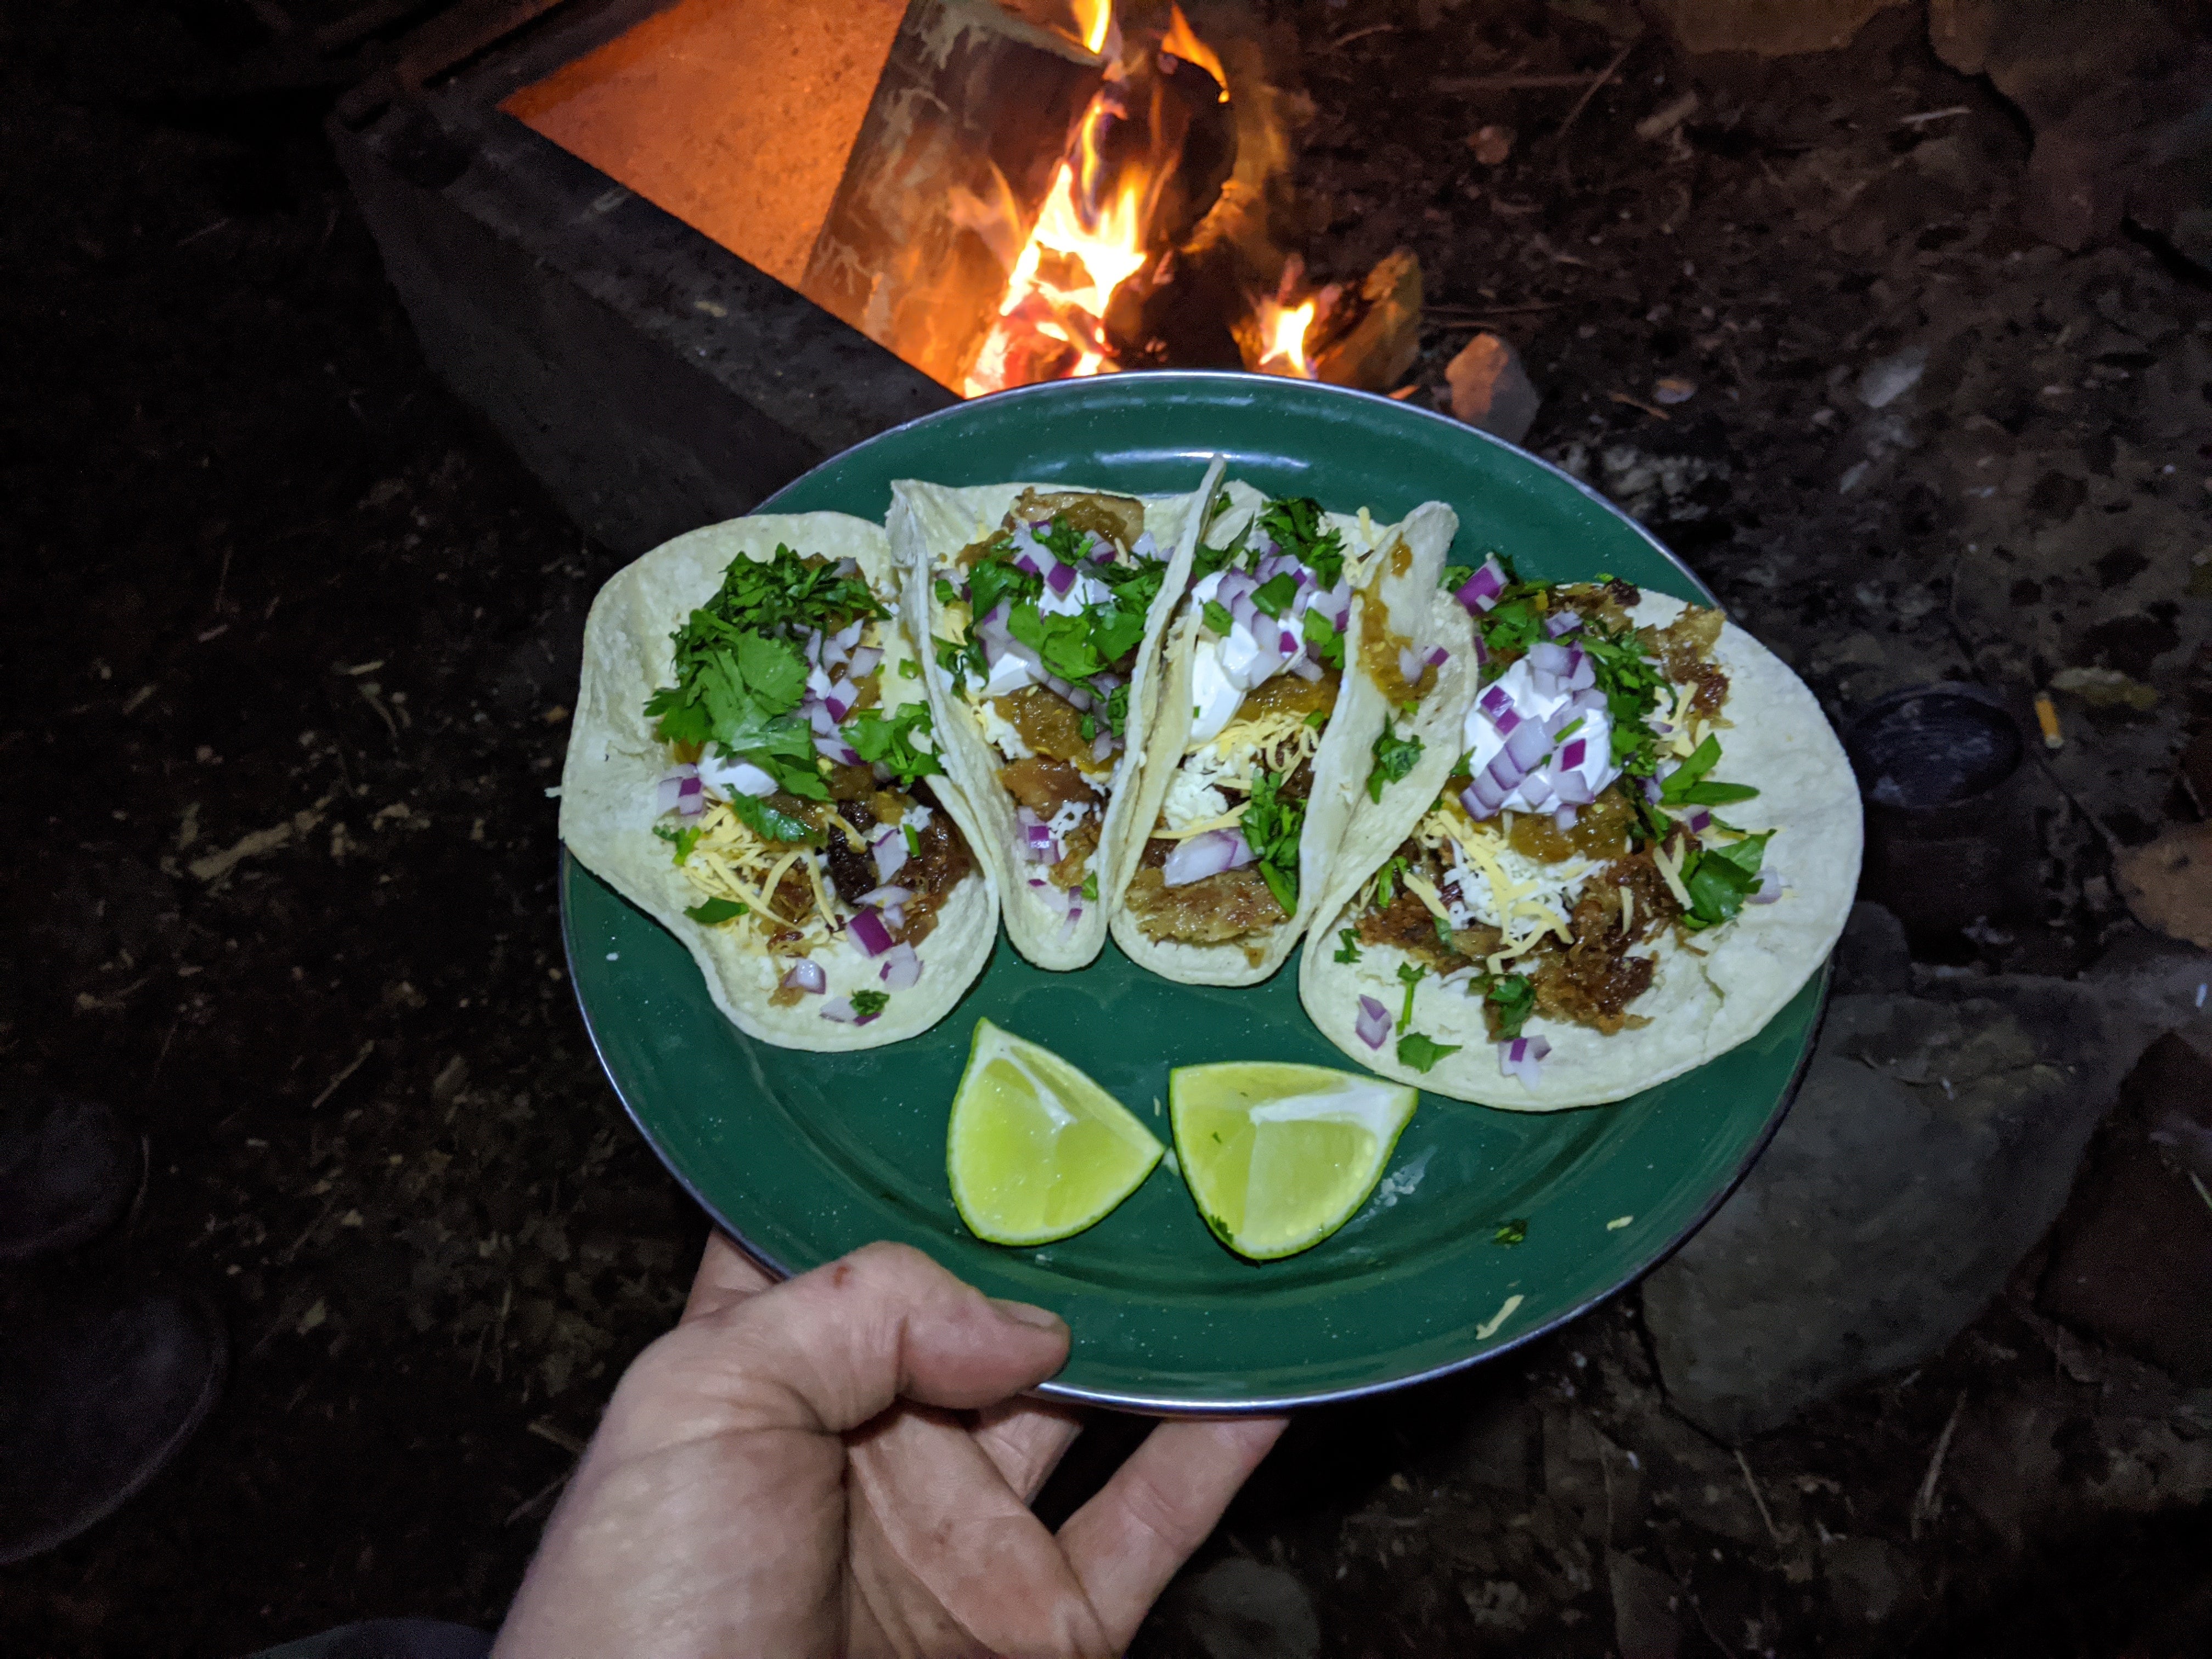 Some wild tacos found while foraging.